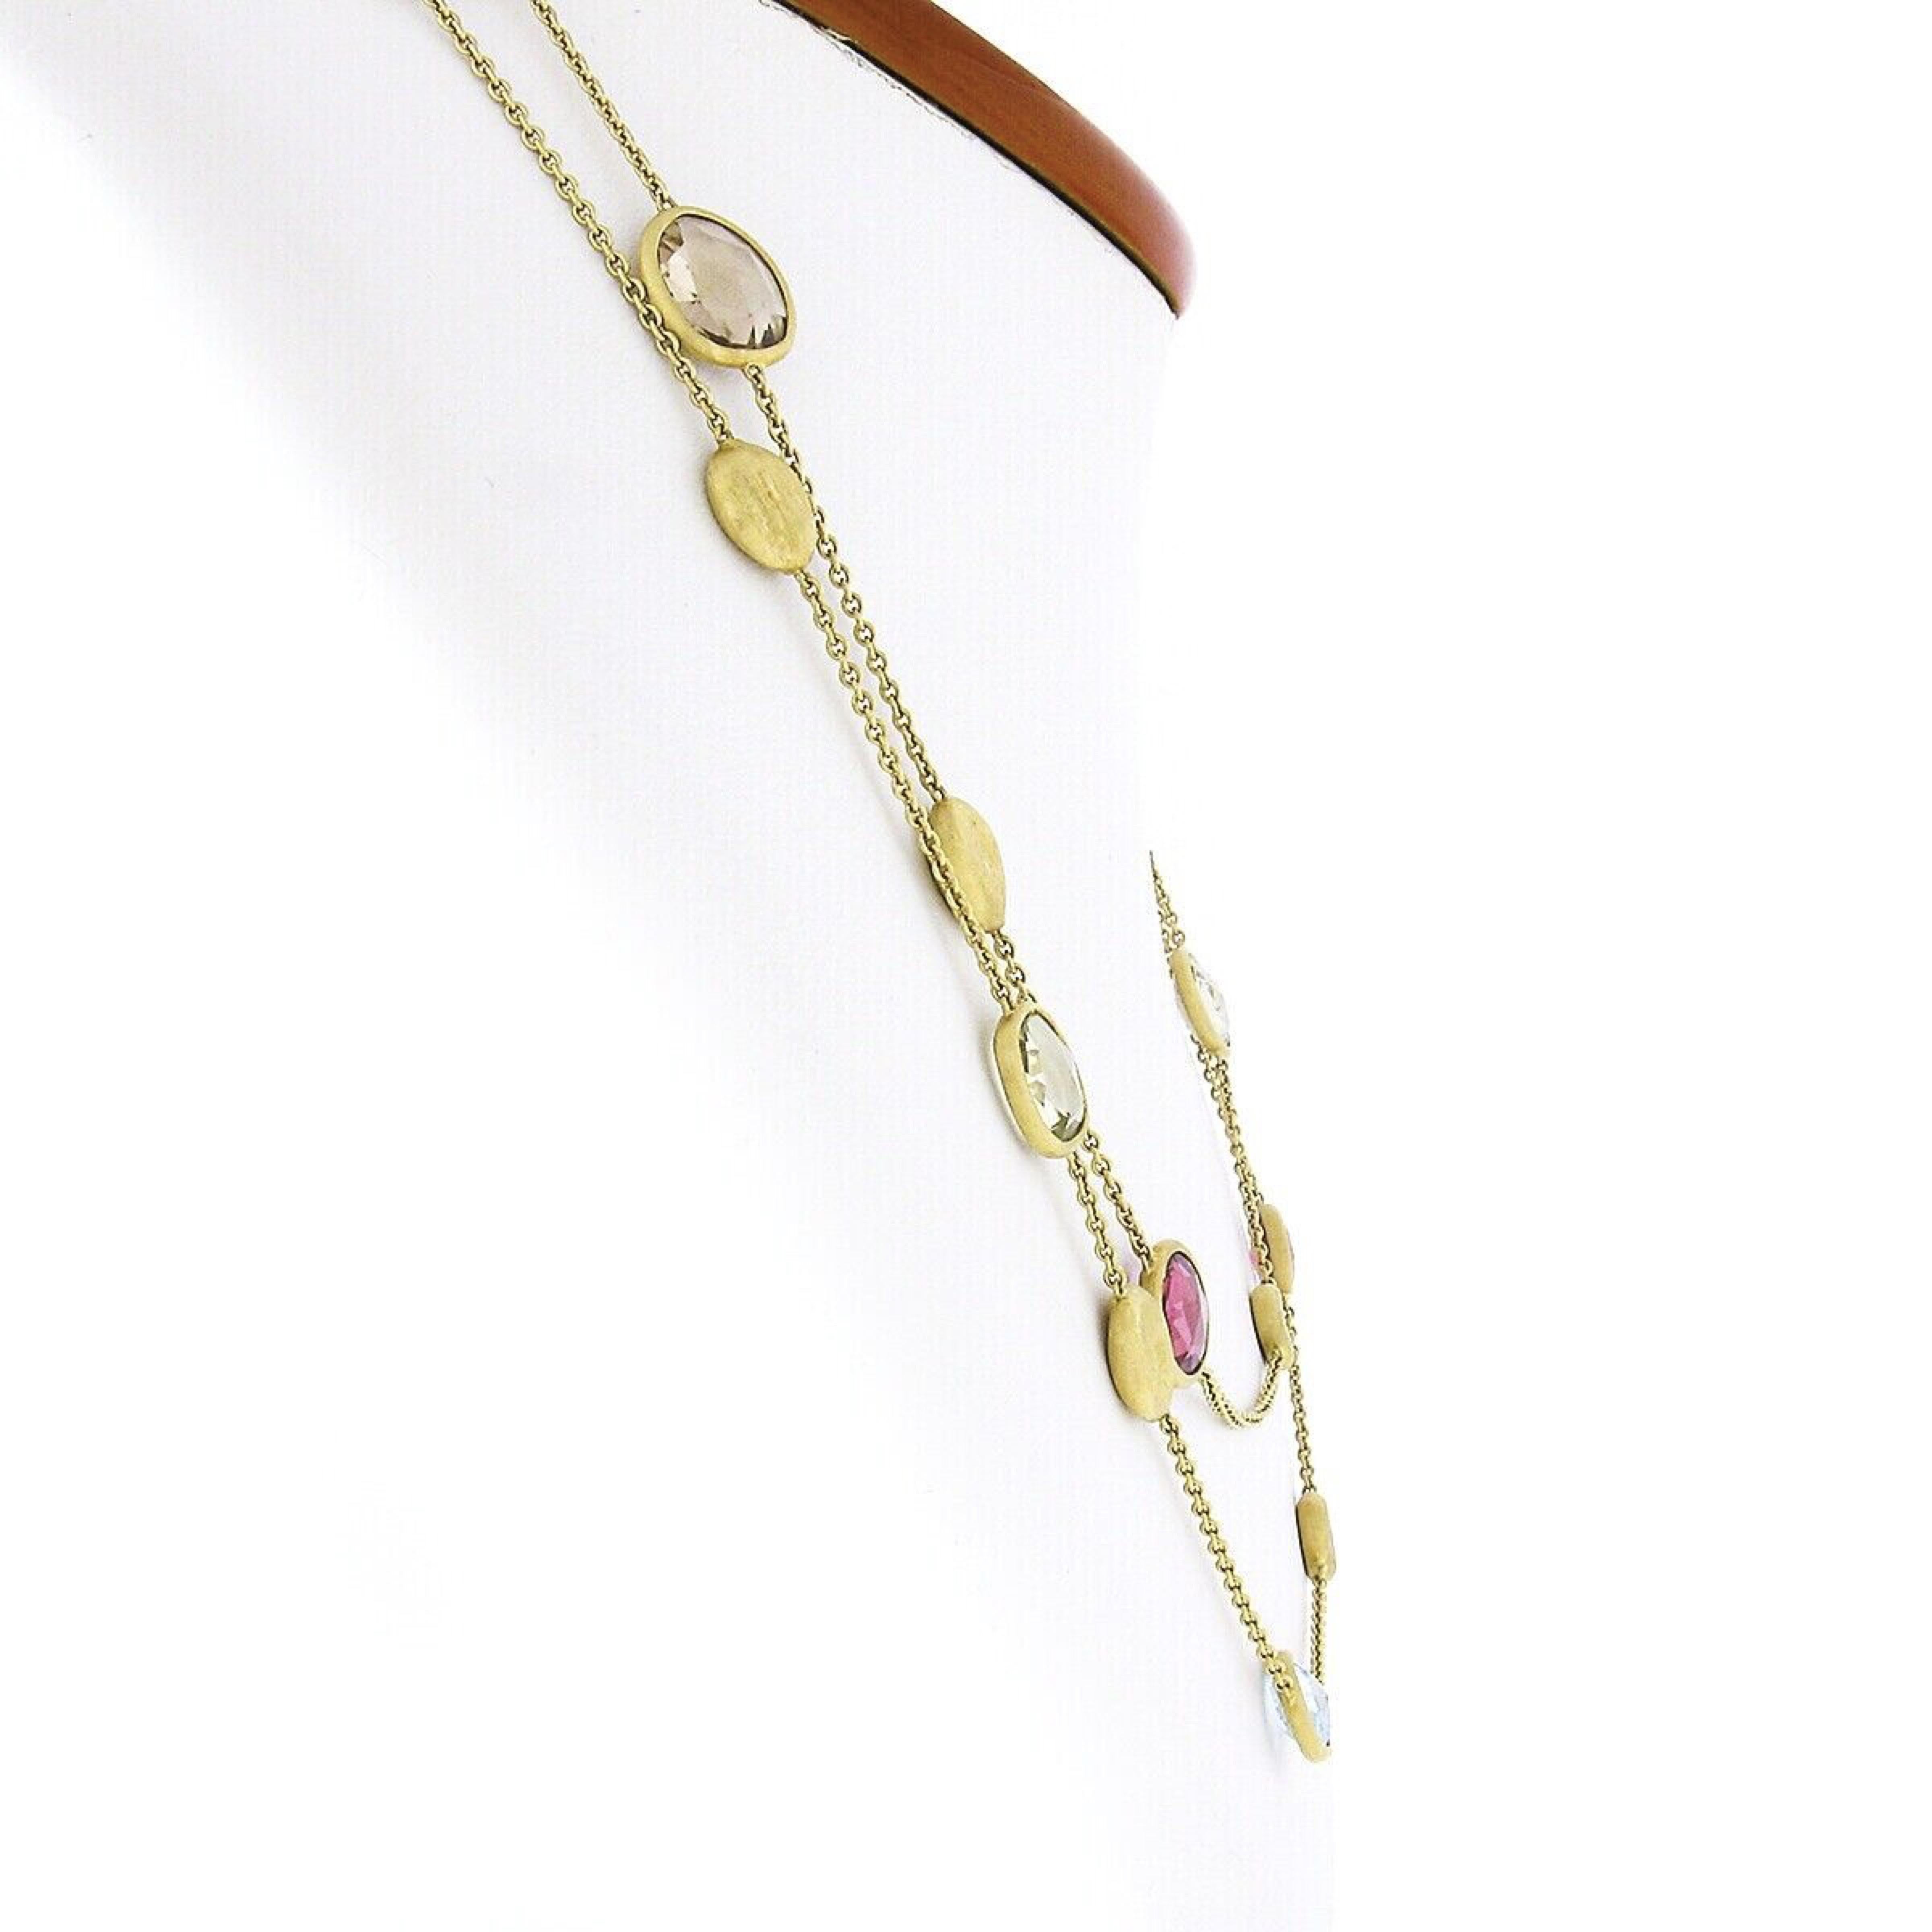 This gorgeous bead station necklace was crafted in Italy from solid 18k yellow gold by Marco Bicego. The long necklace comes from the Jaipur Collection and features fine cable link chain with multiple semiprecious stones that are neatly bezel set